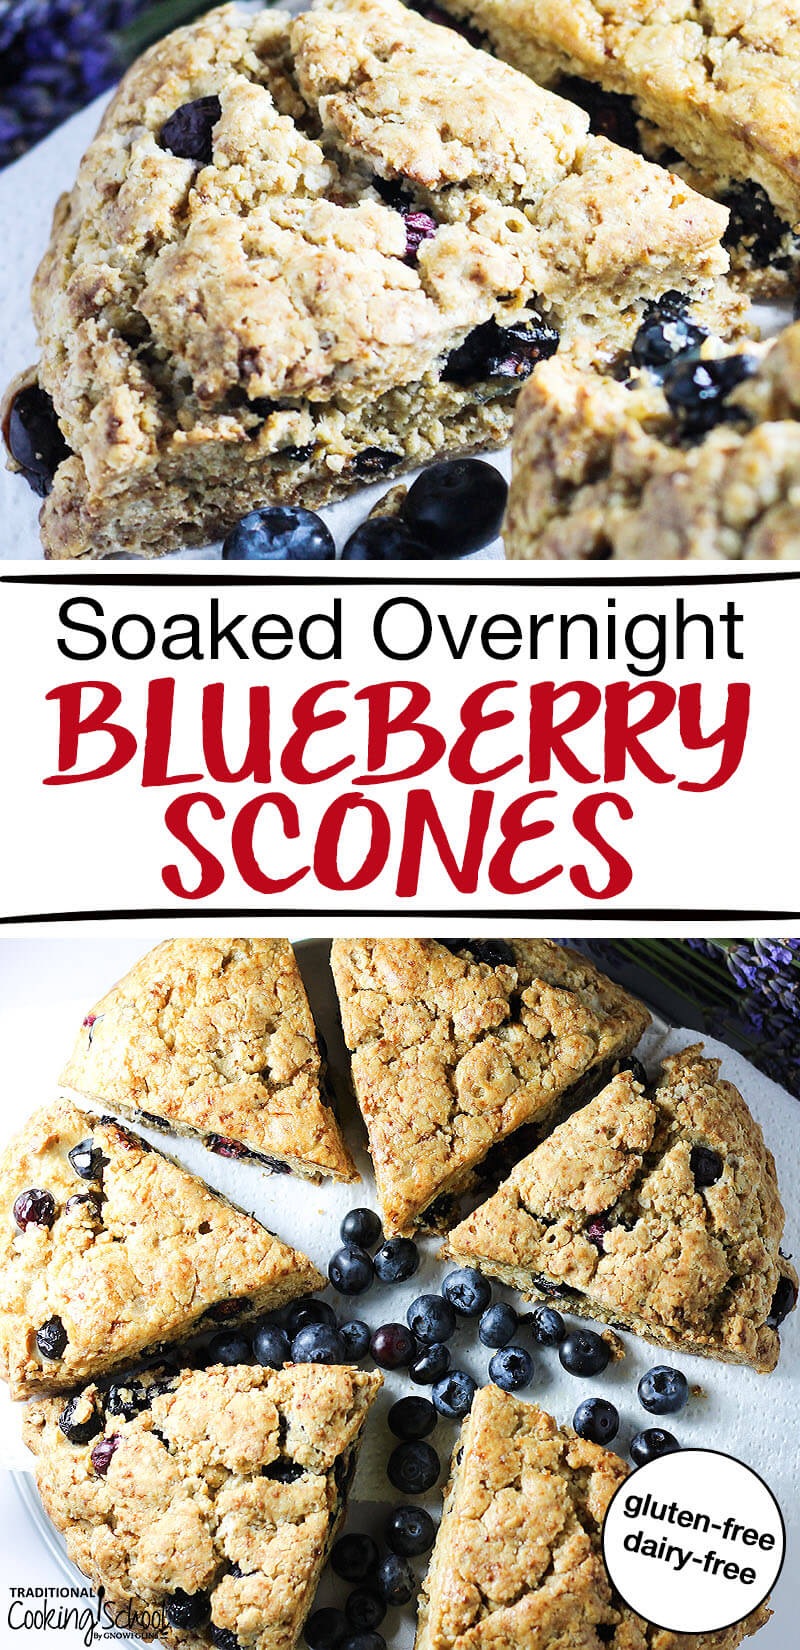 photo collage of blueberry scones with lavender flowers in the background and text overlay: "Soaked Overnight Blueberry Scones"